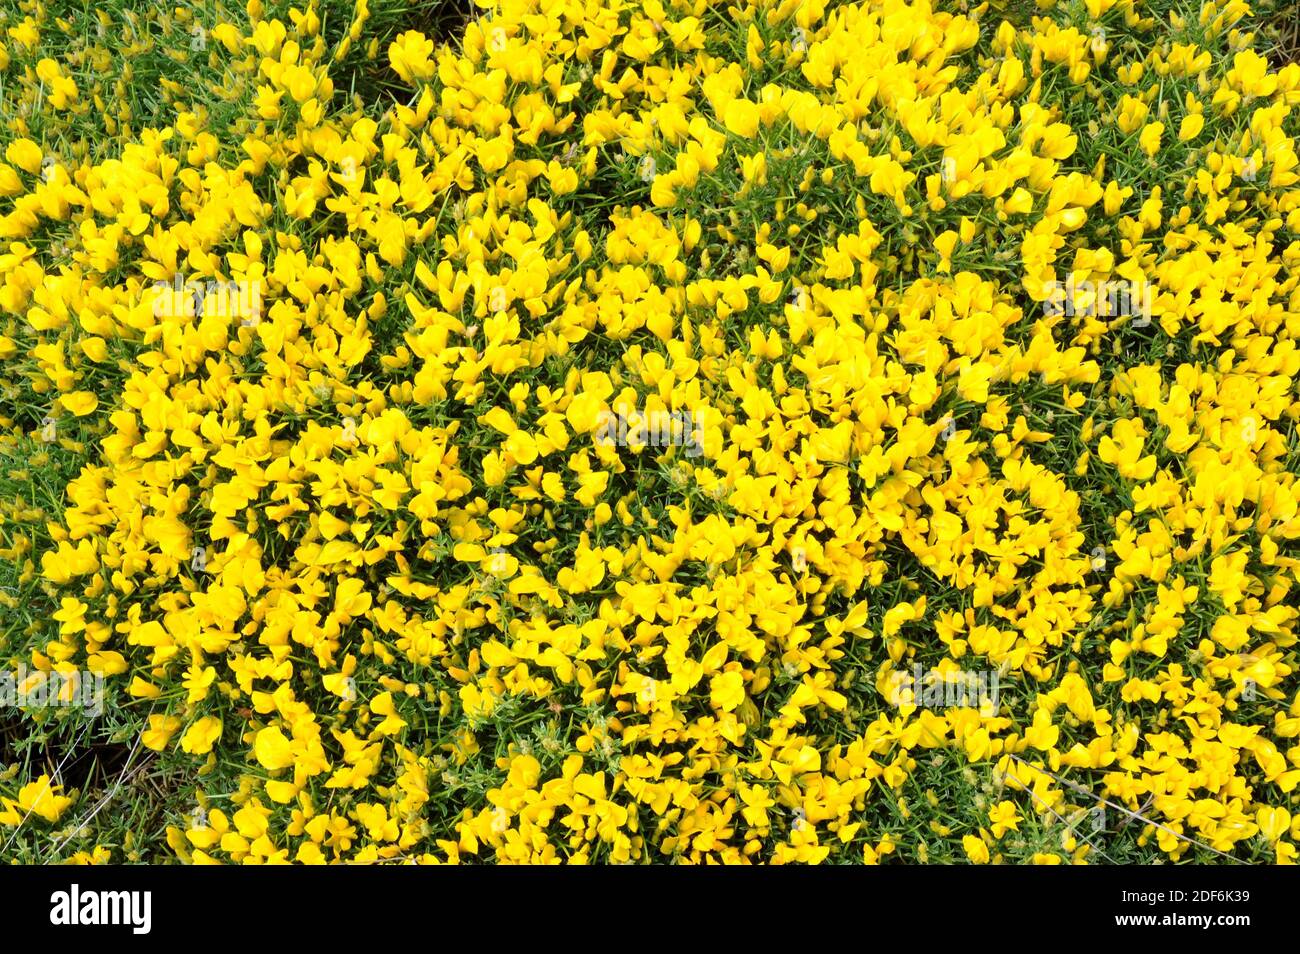 Horrible broom (Echinospartum horridum or Genista horrida) is a cushion-like thorny shrub endemic to Central Pyrenees and French Central Massif. This Stock Photo